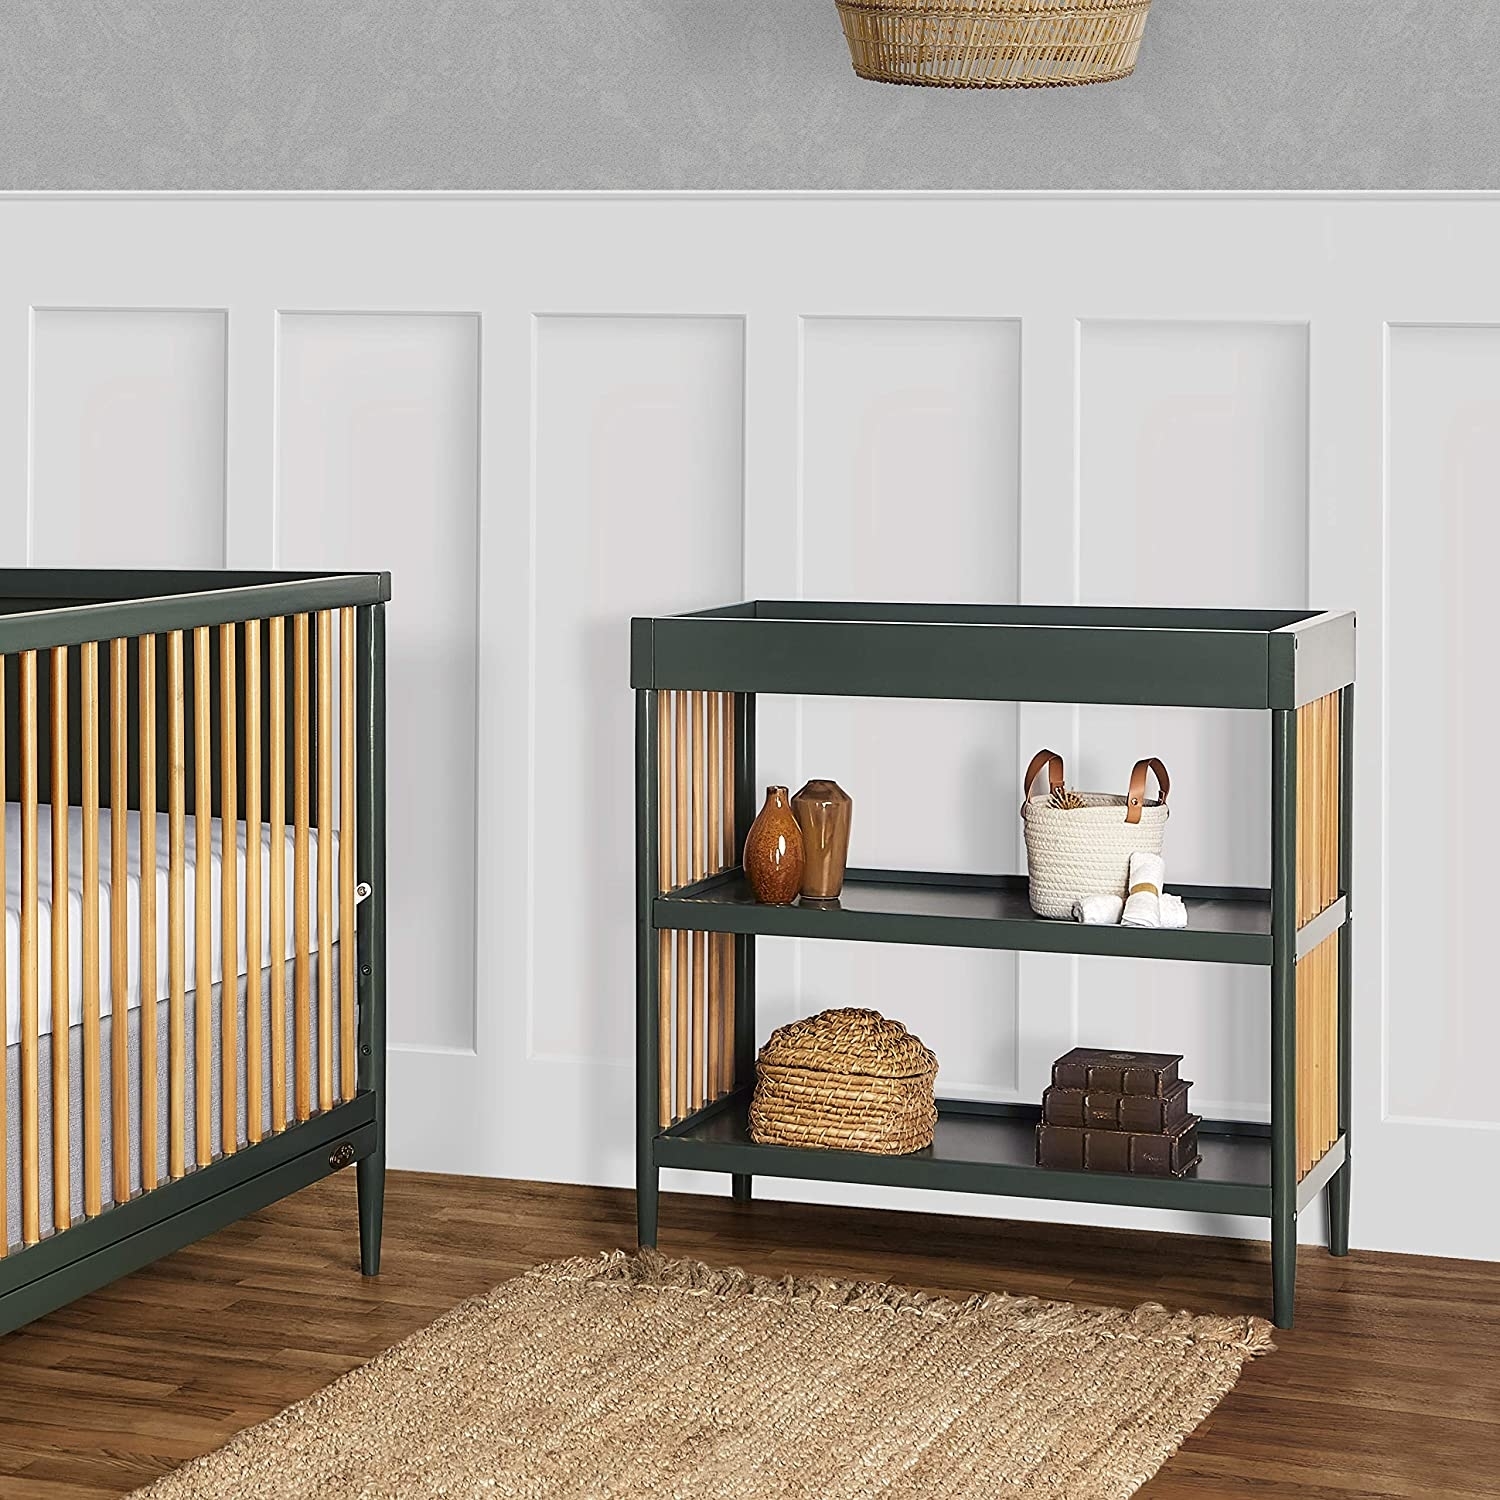 natural wood and green changing table and crib in nursery